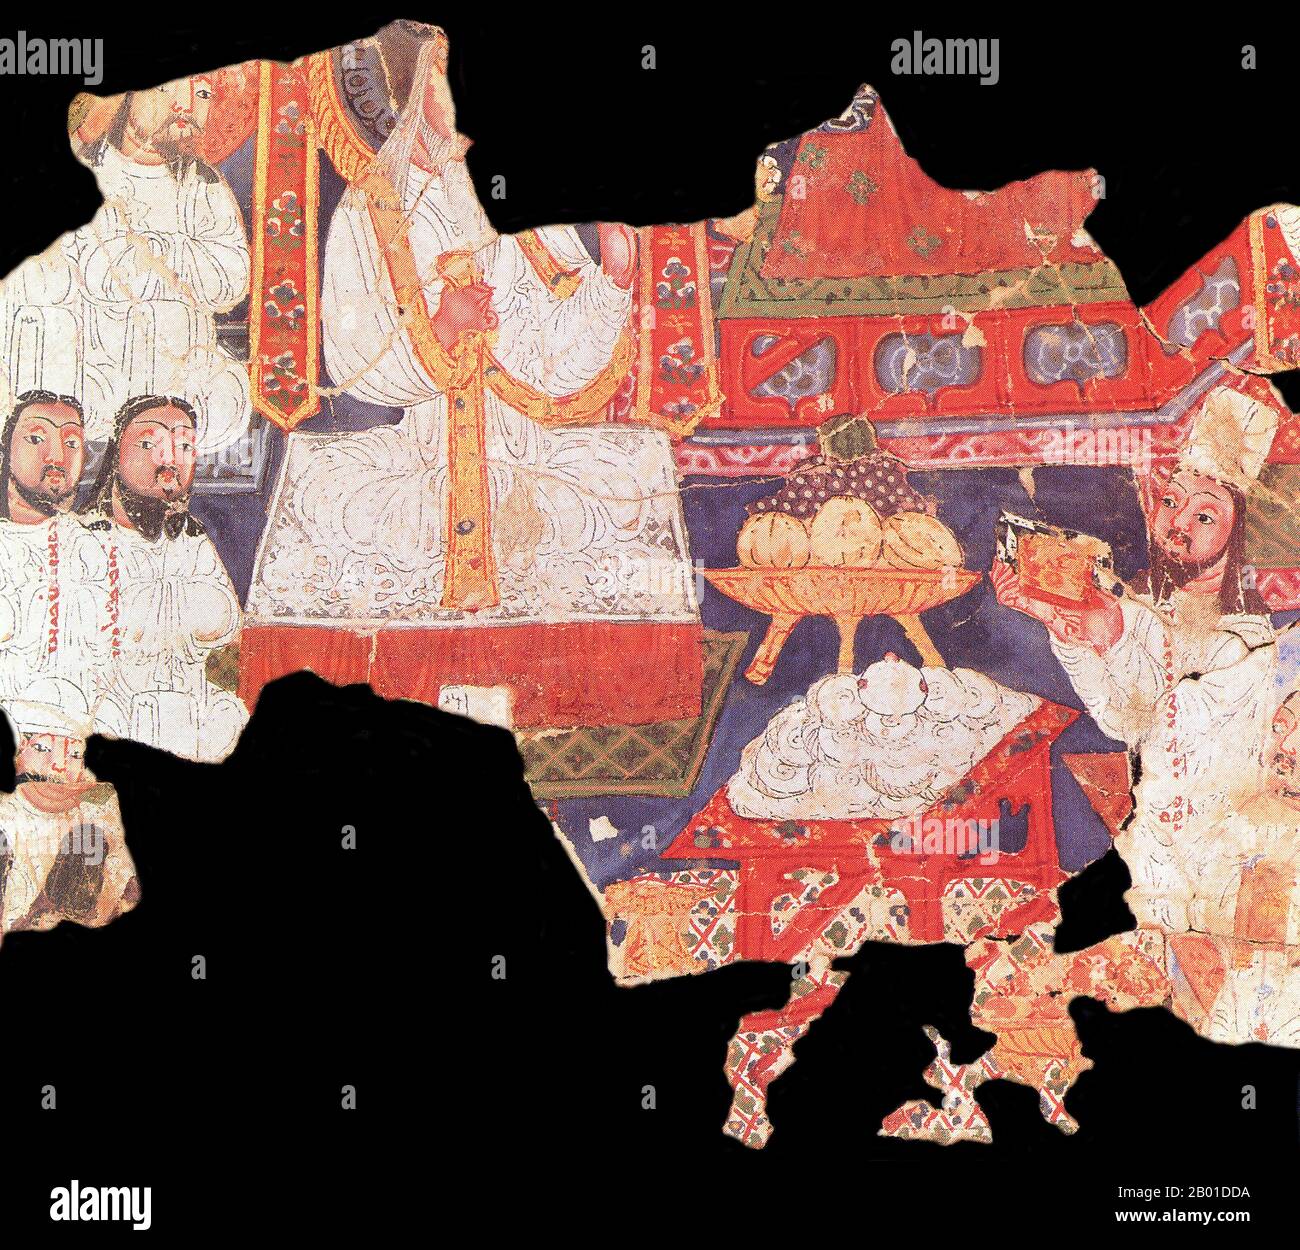 China: Fragment of a painting depicting a Manichaean ritual before an altar, from Turfan, Xinjiang, c. 8th-9th century.   Sacred meal of the elect at a festival of thanksgiving for Mani.  Manichaeism was the most important Gnostic religion. Central in the Manichaean teaching was dualism, that the world itself, and all creatures, were part of a battle between the good, represented by God, and the bad, the darkness, represented by a power driven by envy and lust.  Manichaeism spread over most of the known world of the 1st millennium CE, but disappeared by the 14th century and is now extinct. Stock Photo